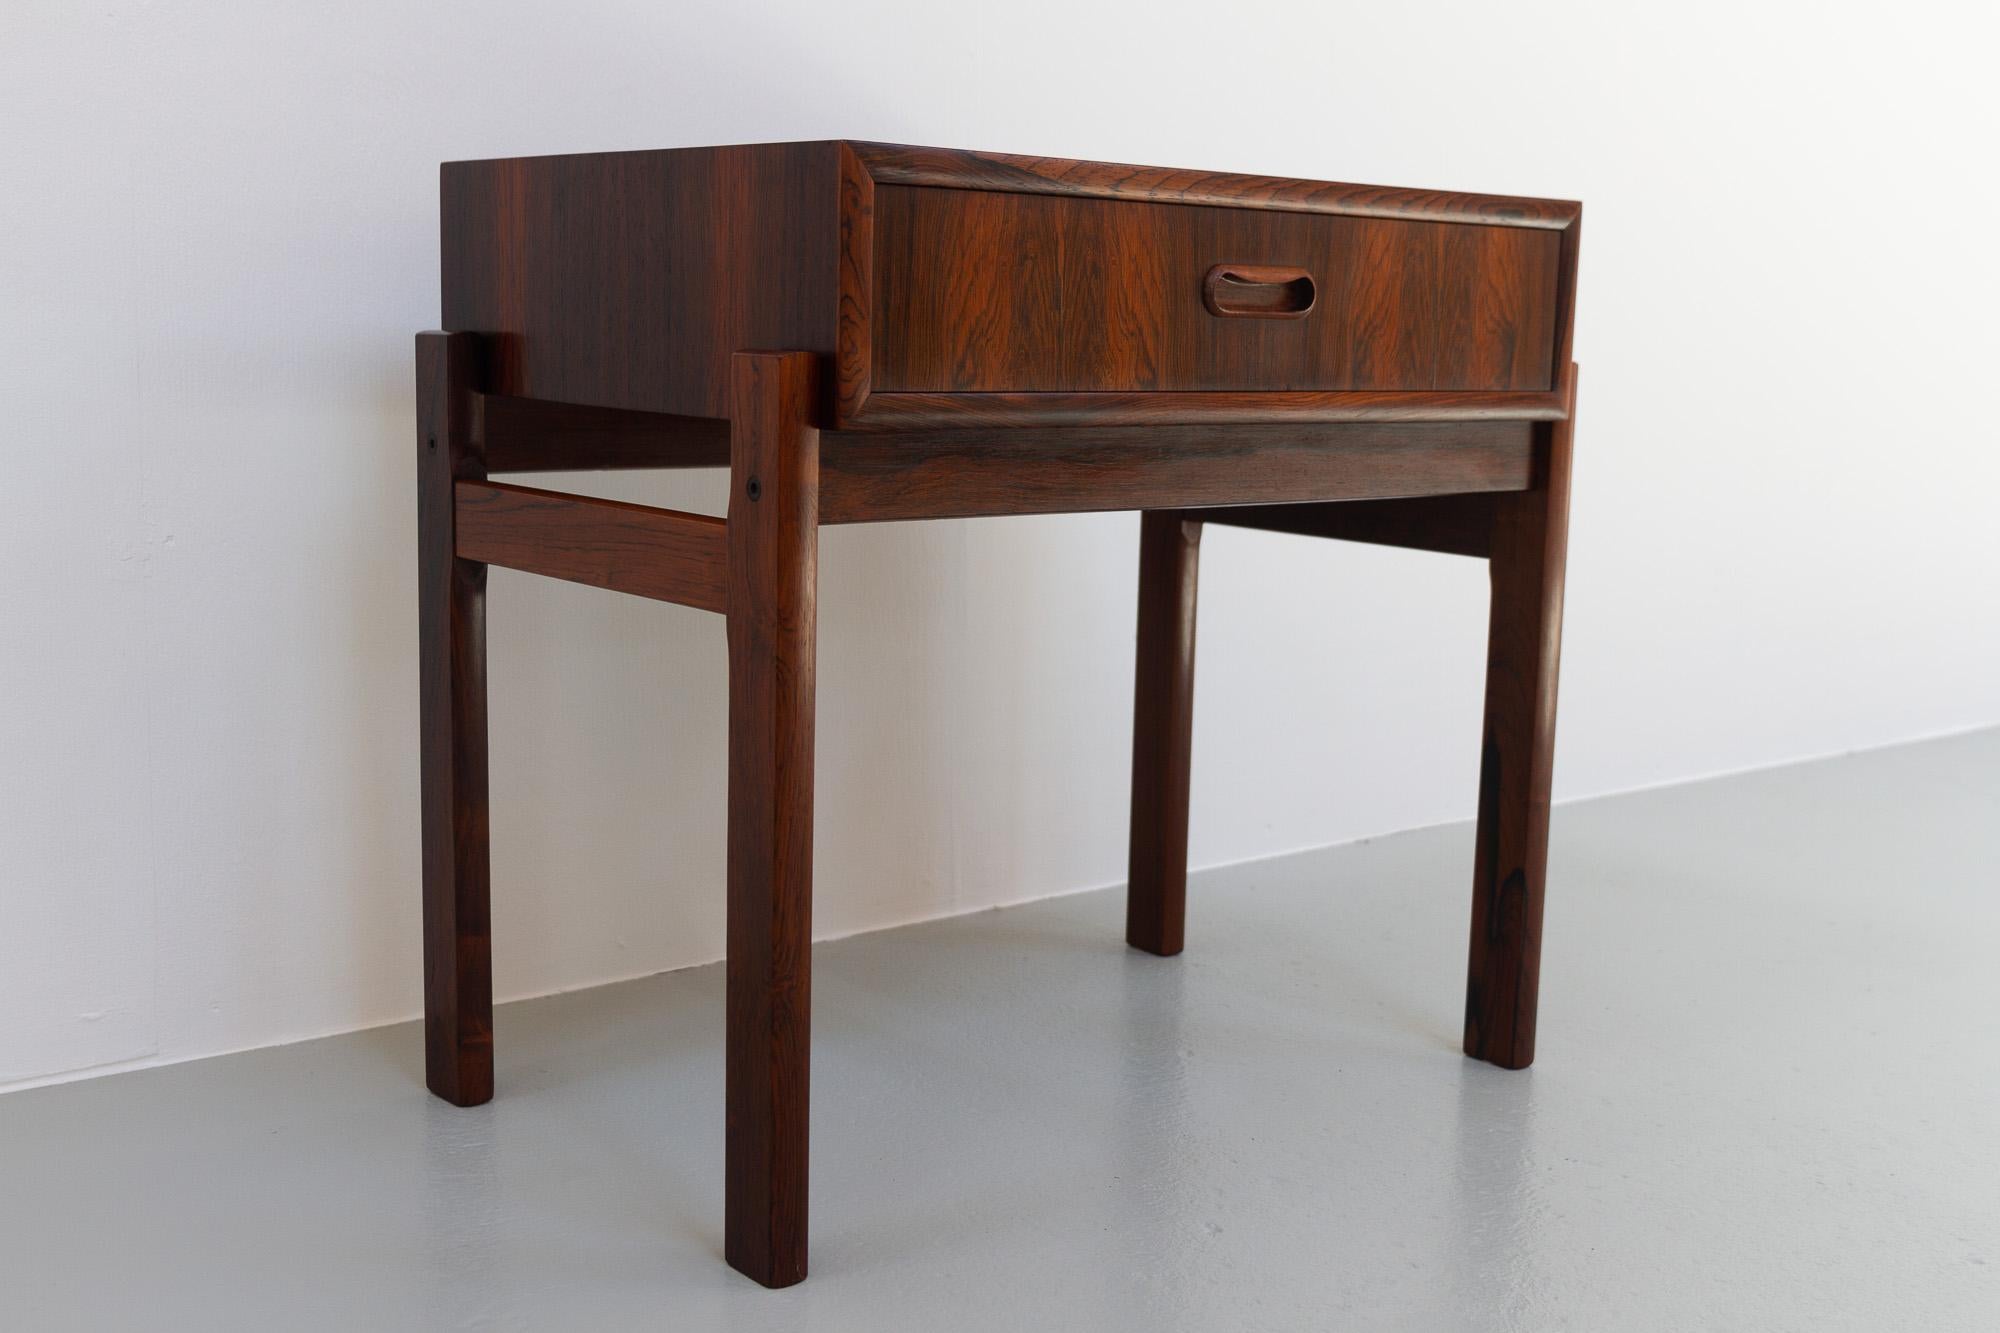 Danish Modern Rosewood Nightstand, 1960s

Elegant and stylish night stand in very beautiful rich and expressive Rosewood/palisander veneer made by cabinetmaker in Denmark in the 1960s.
One wide drawer with sculpted pull in solid Rosewood.